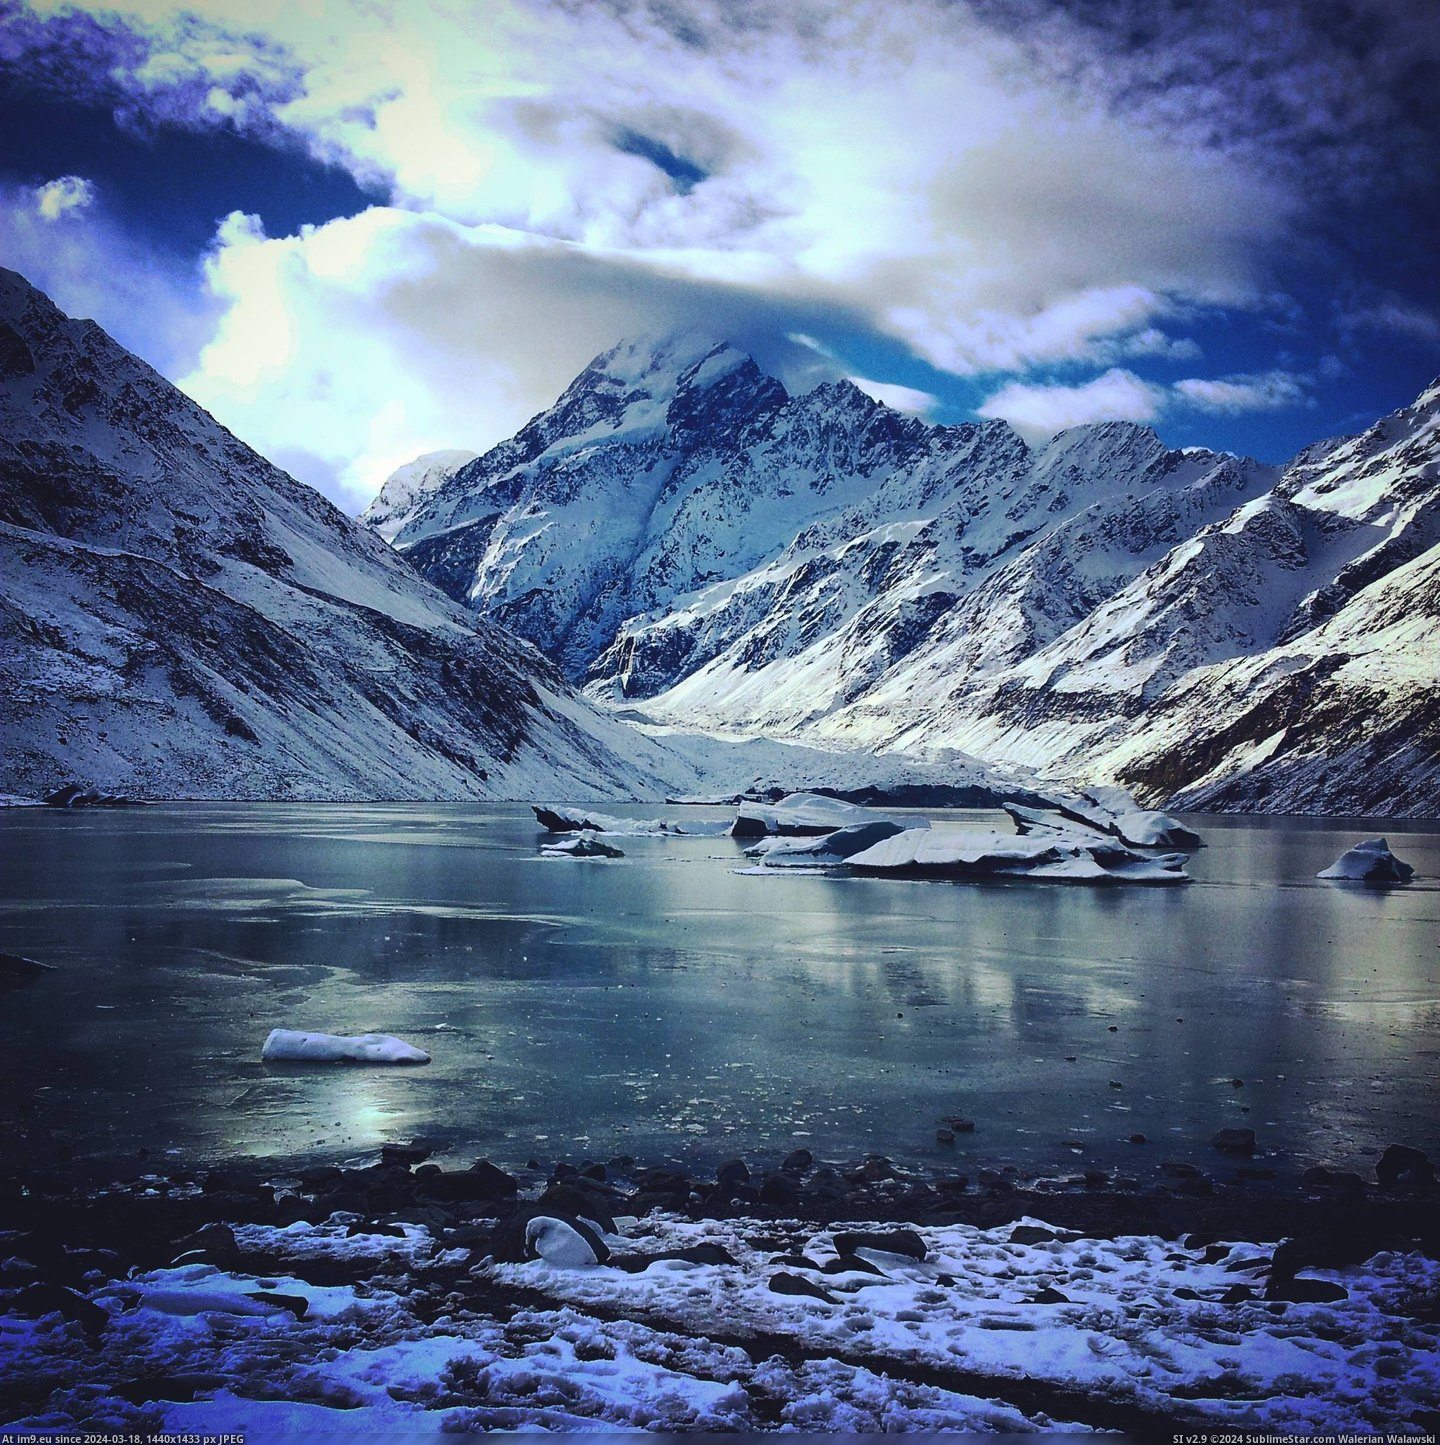 #Hooker #Lake #End #Frozen #Track #Cook #Valley #Mount #Zealand [Earthporn] The frozen lake at the end of the Hooker Valley track, Mount Cook, New Zealand [2448x2448px] Pic. (Image of album ))